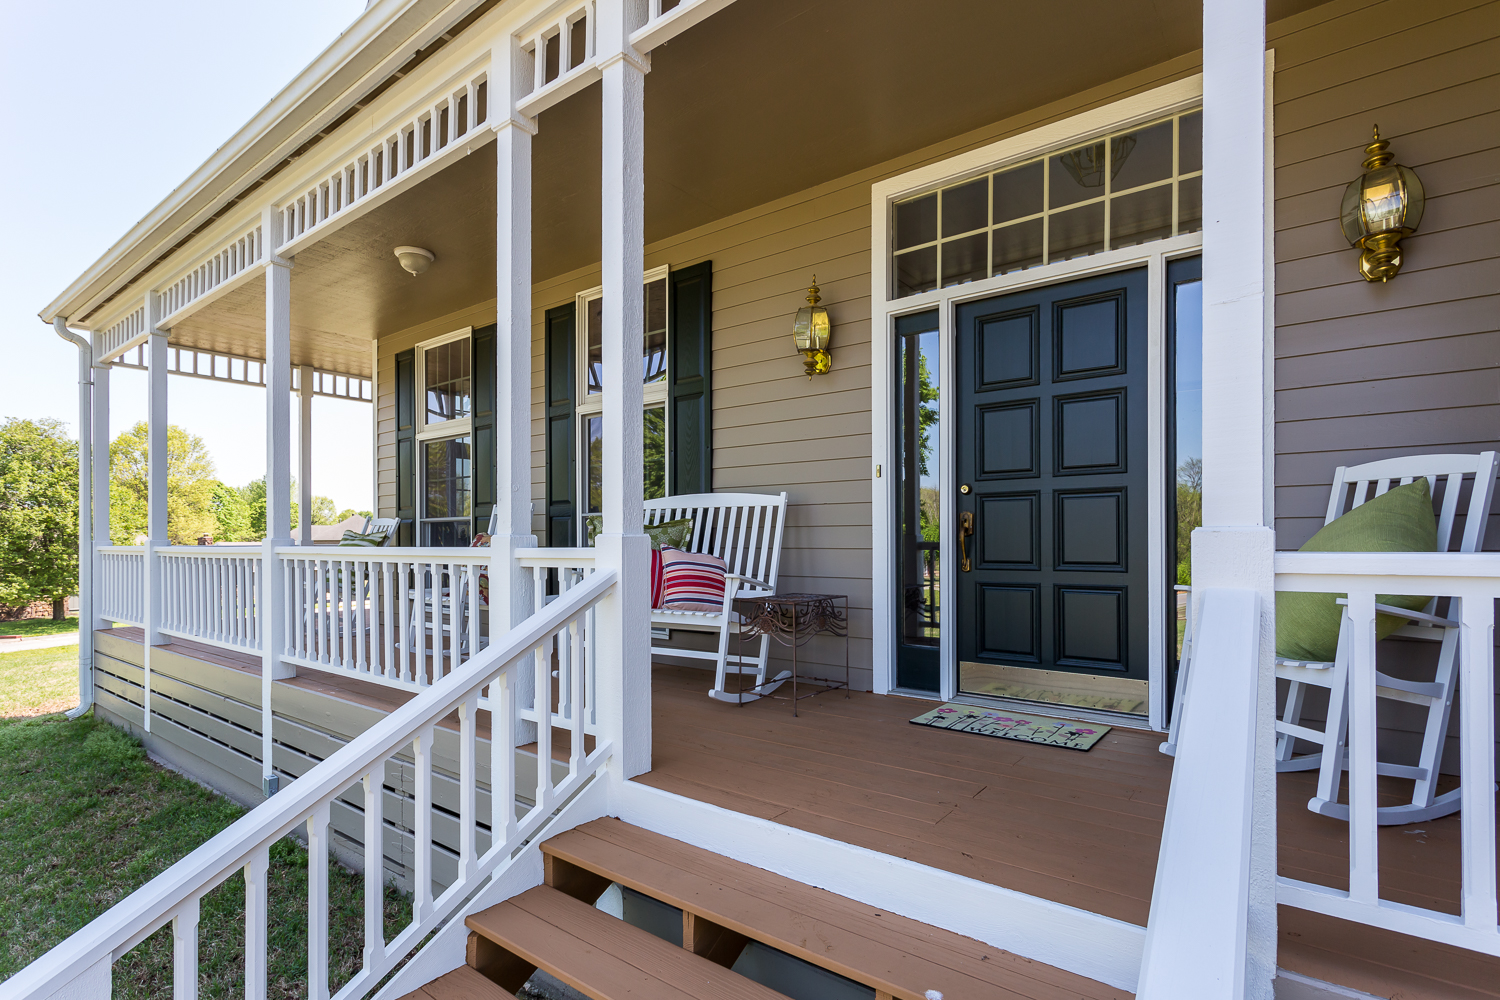 Front porch shot for real estate photo shoot of home in Siloam S